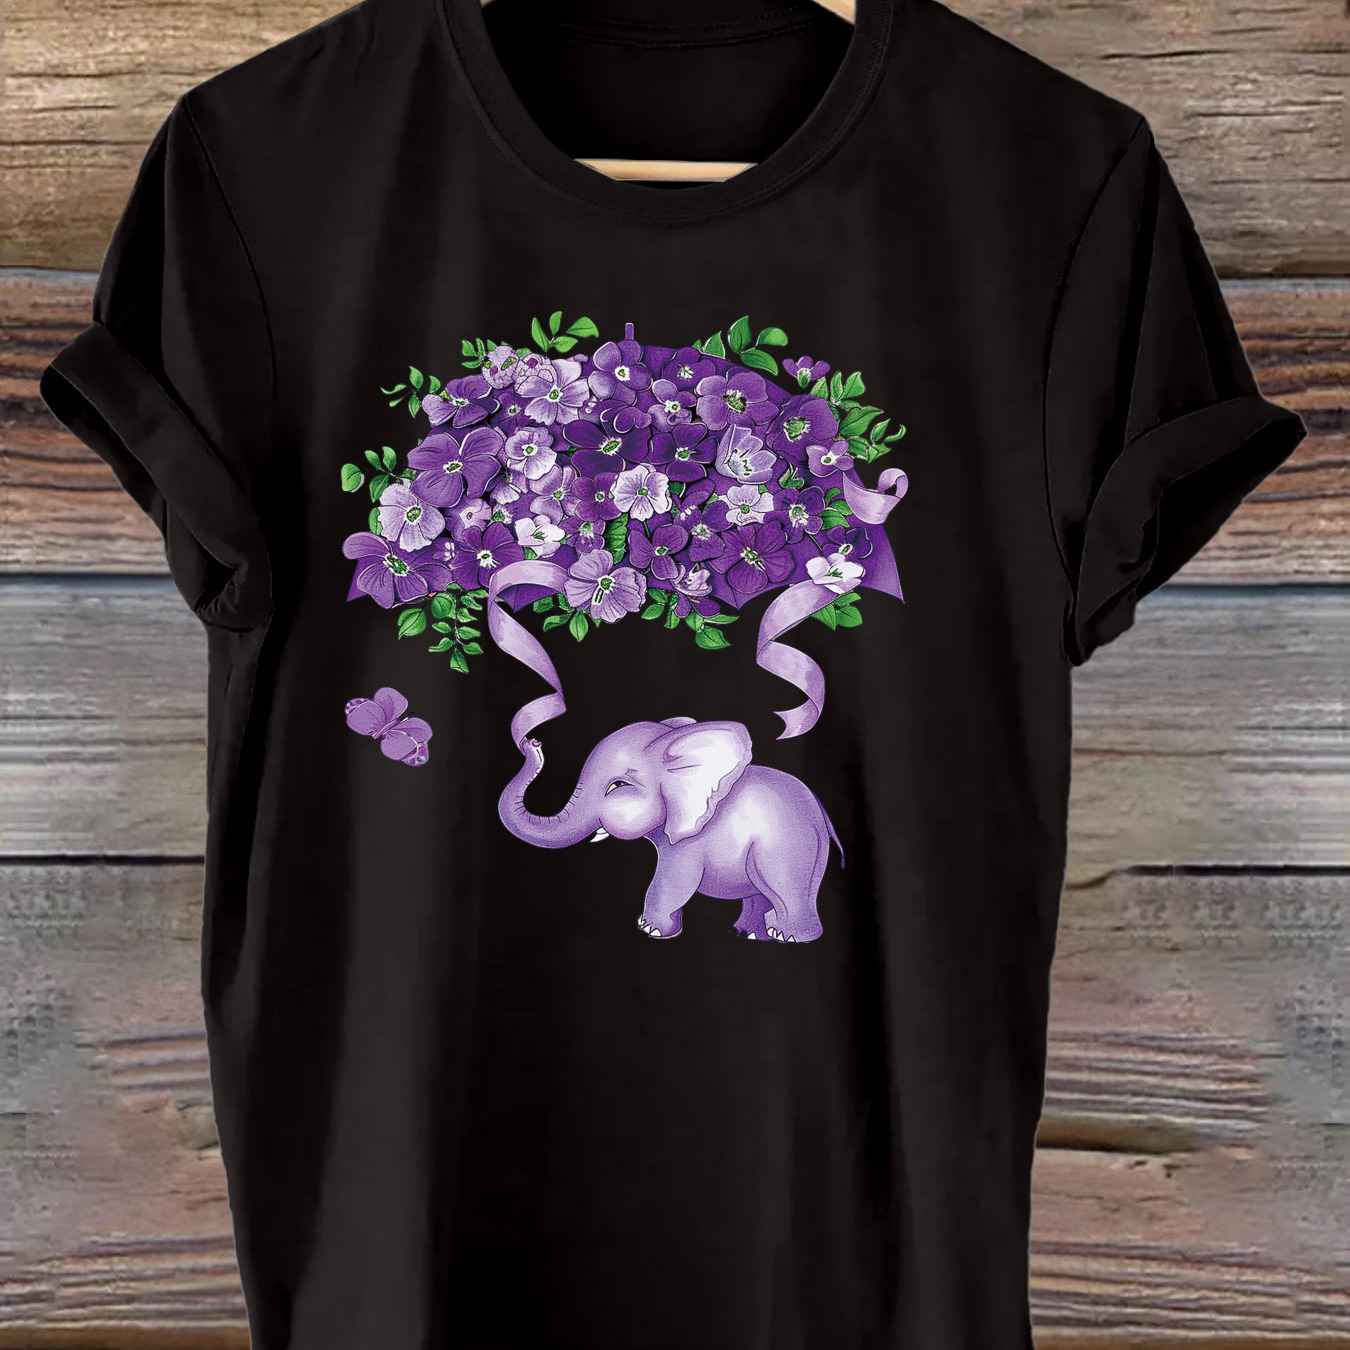 

Floral & Elephant Print T-shirt, Short Sleeve Crew Neck Casual Top For Summer & Spring, Women's Clothing